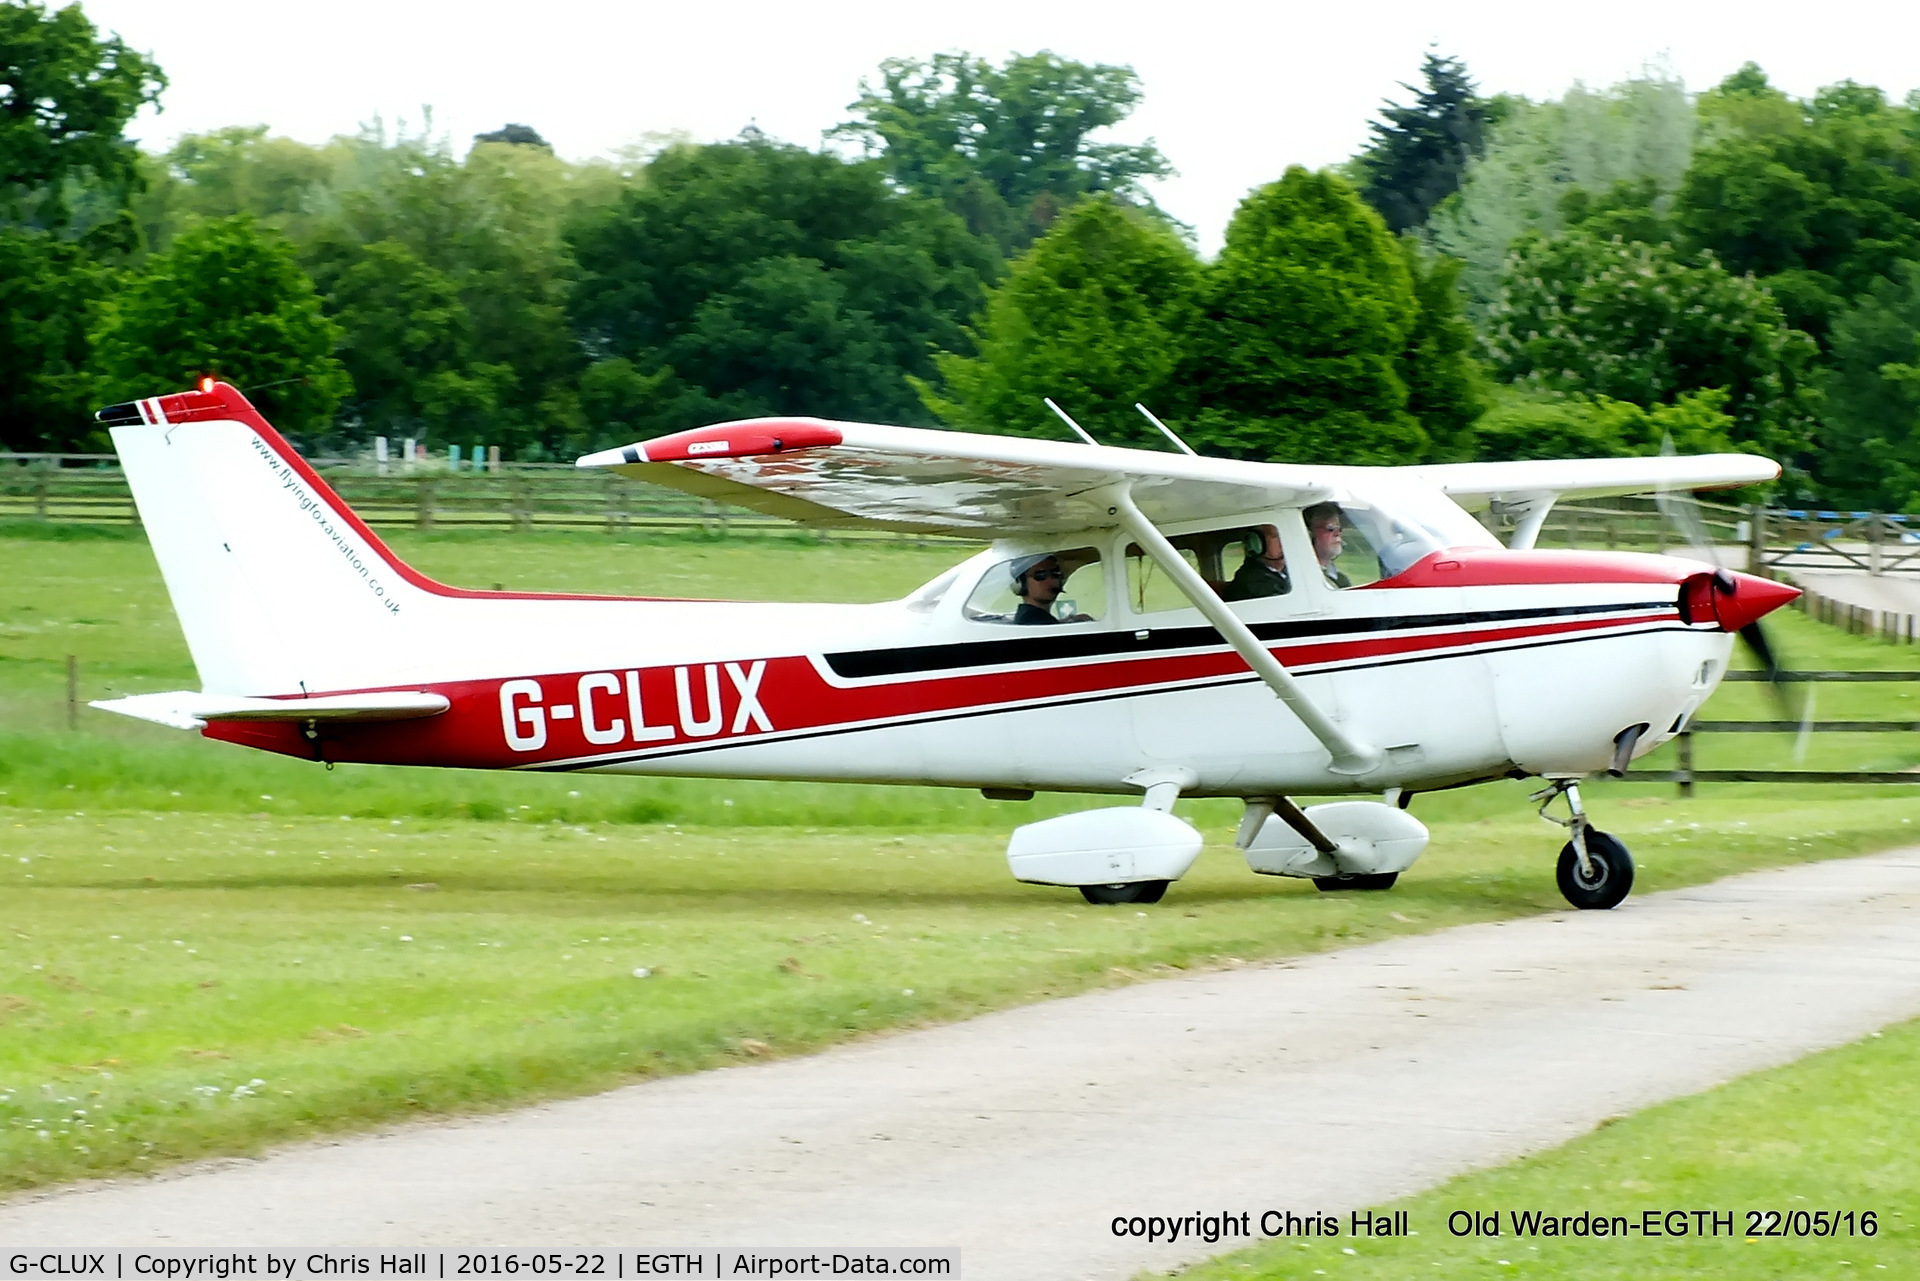 G-CLUX, 1980 Reims F172N Skyhawk C/N 1996, 70th Anniversary of the first flight of the de Havilland Chipmunk  Fly-In at Old Warden